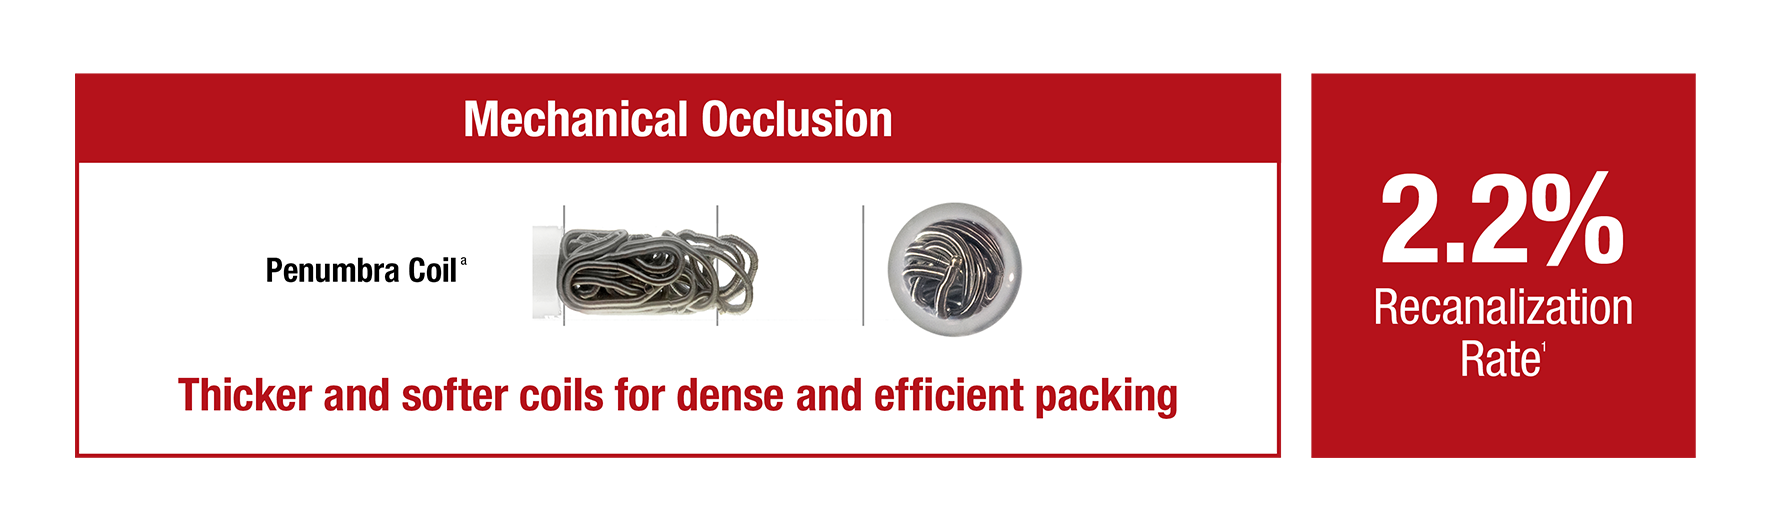 Mechanical Occlusion showcasing recanalization rate (details below) with text "Thicker and softer coils for dense and efficient packing"